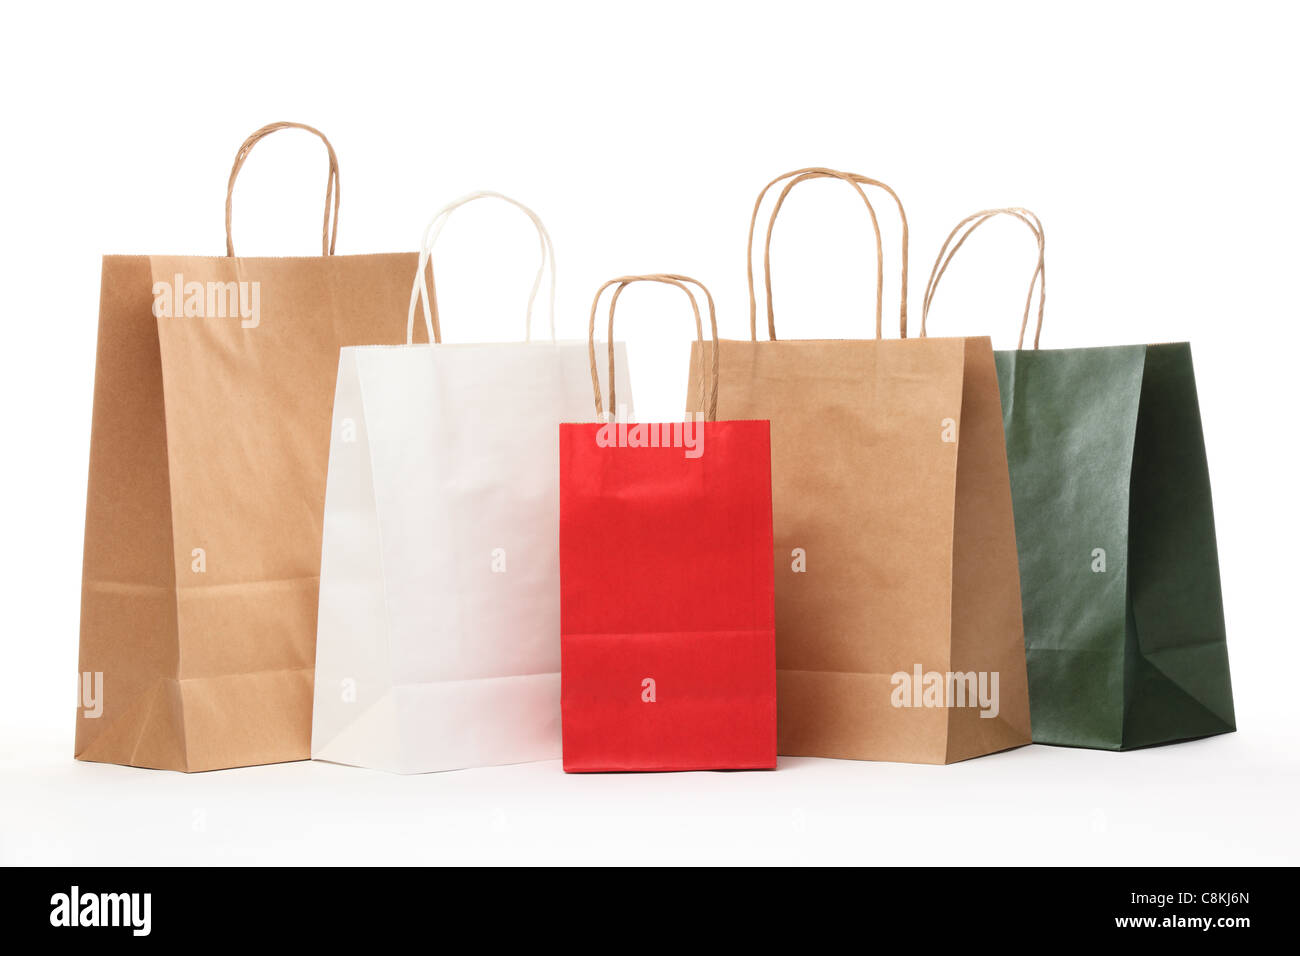 Shopping bags isolated on white background. Stock Photo